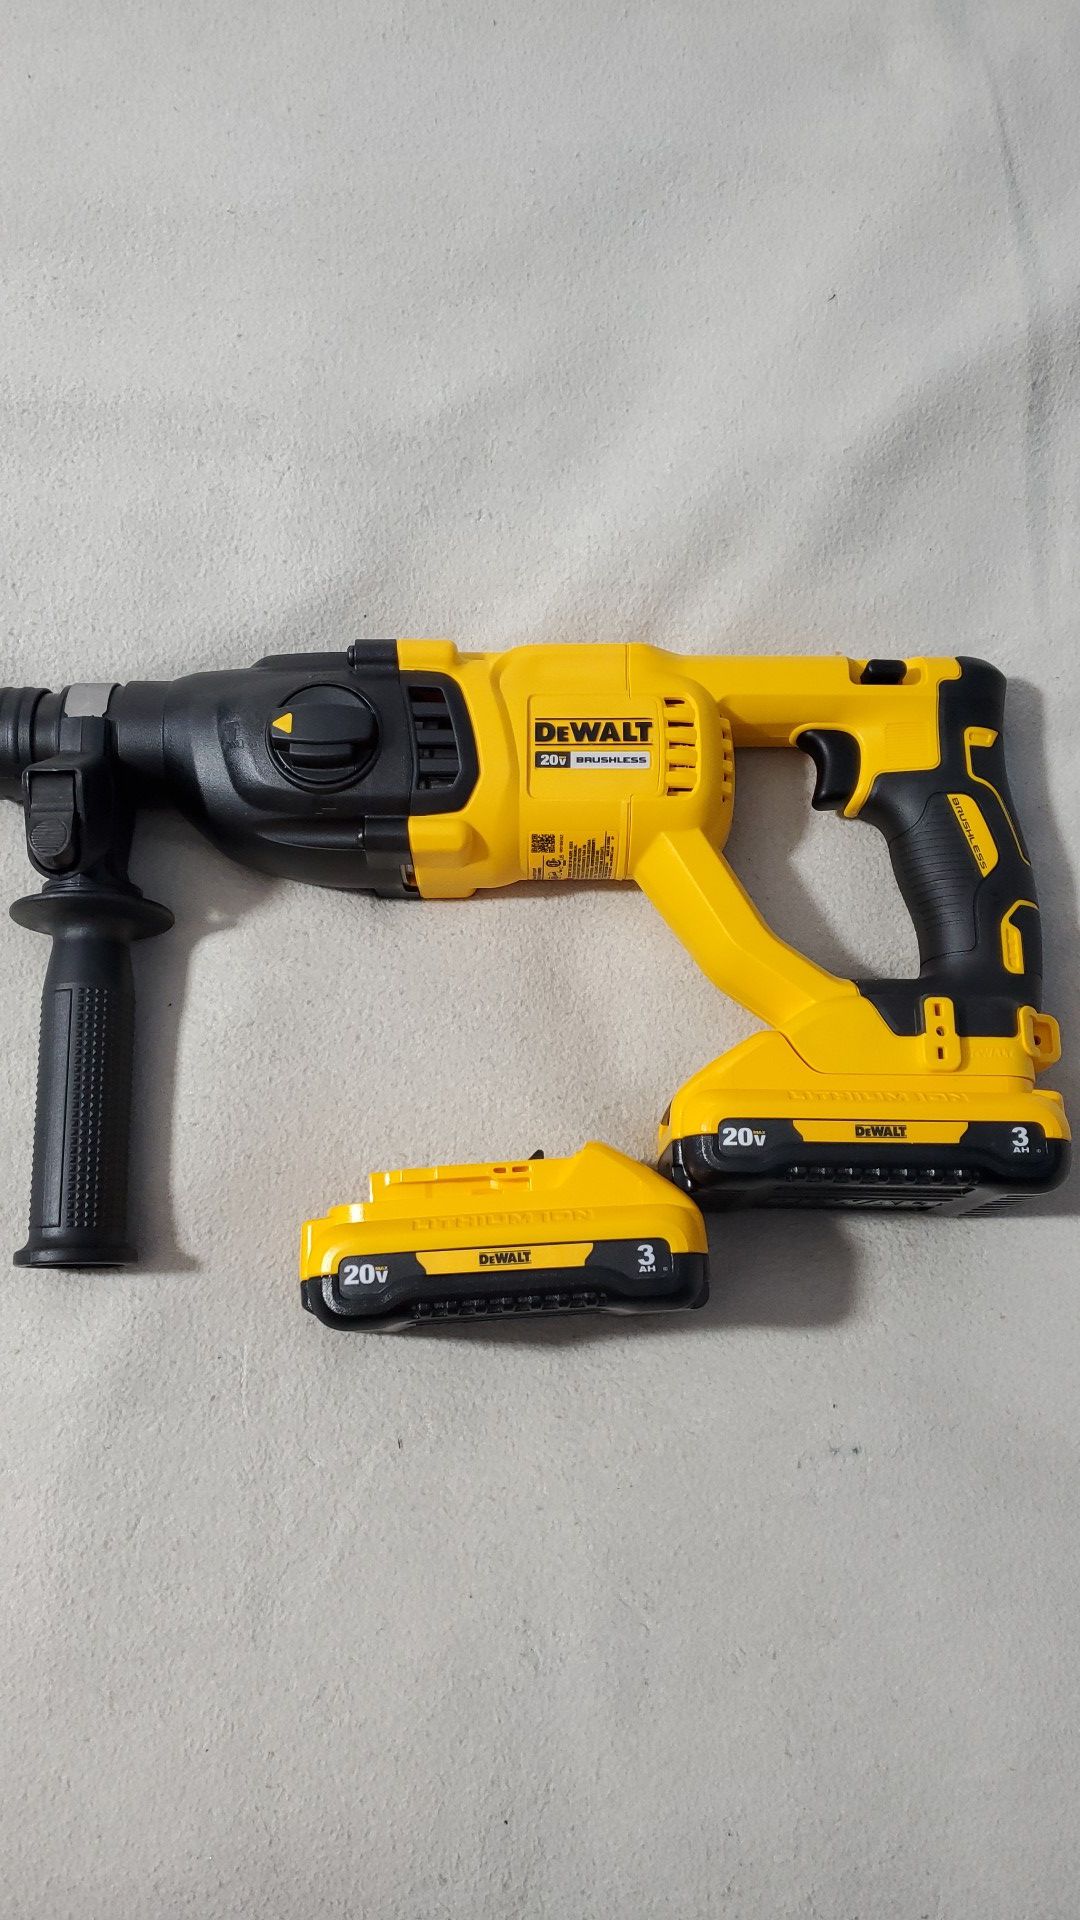 Dewalt 20V Max Brushless SDS Plus 1" Hammer Drill. Brand new. With 2 new 3ah batteries